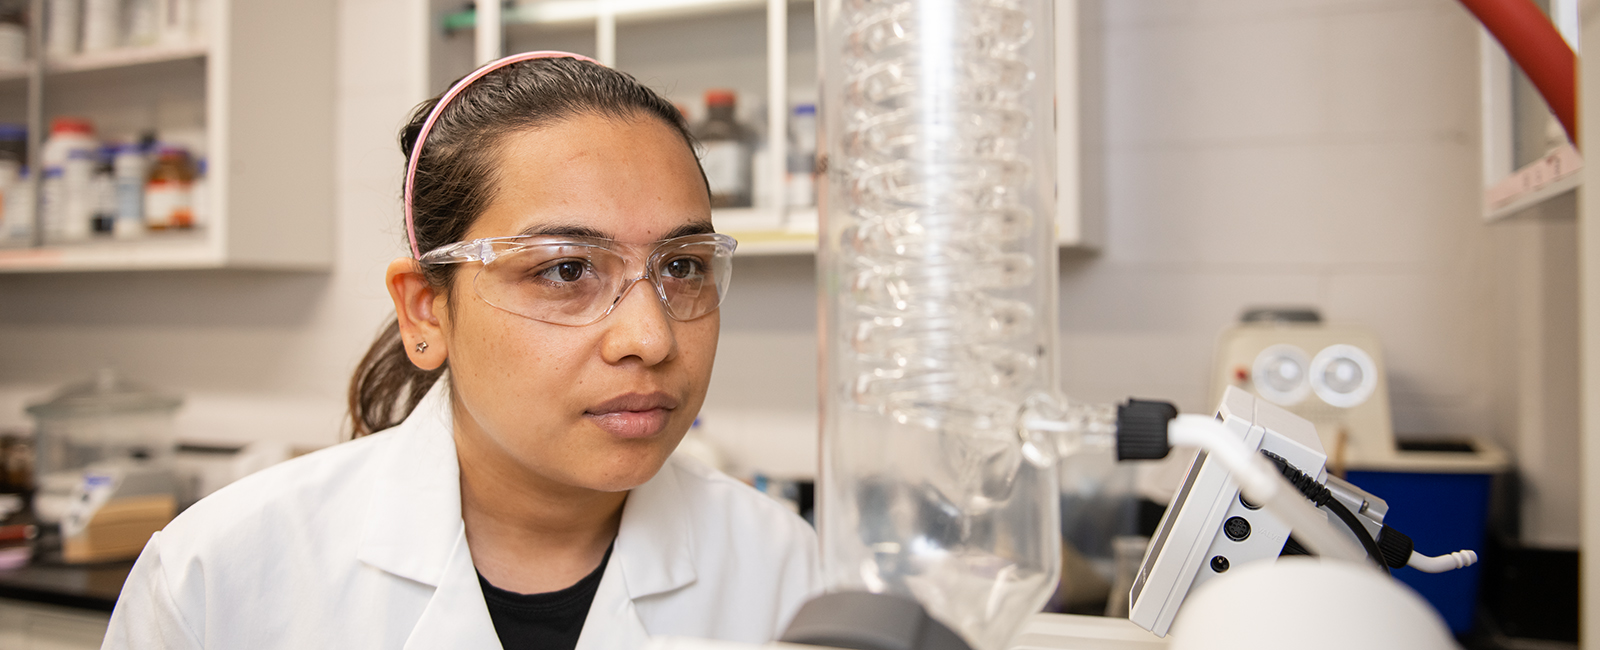 Graduate student watches an experiment in a lab.